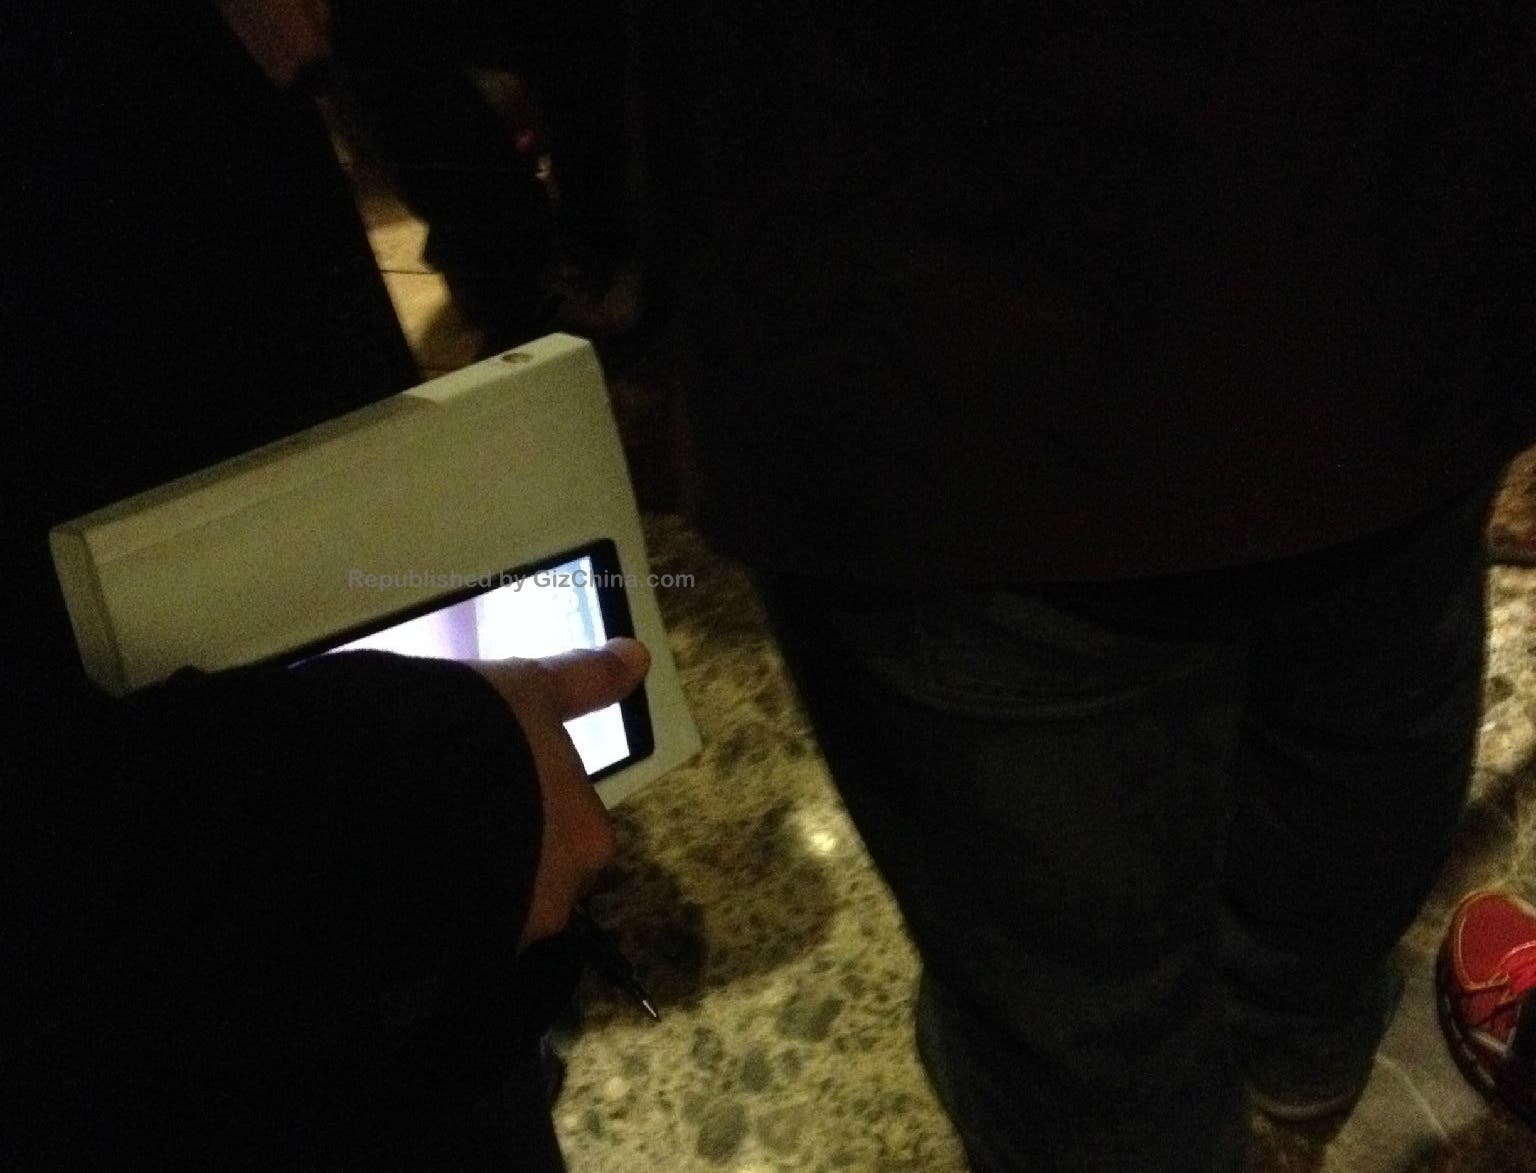 oppo find 7 spotted